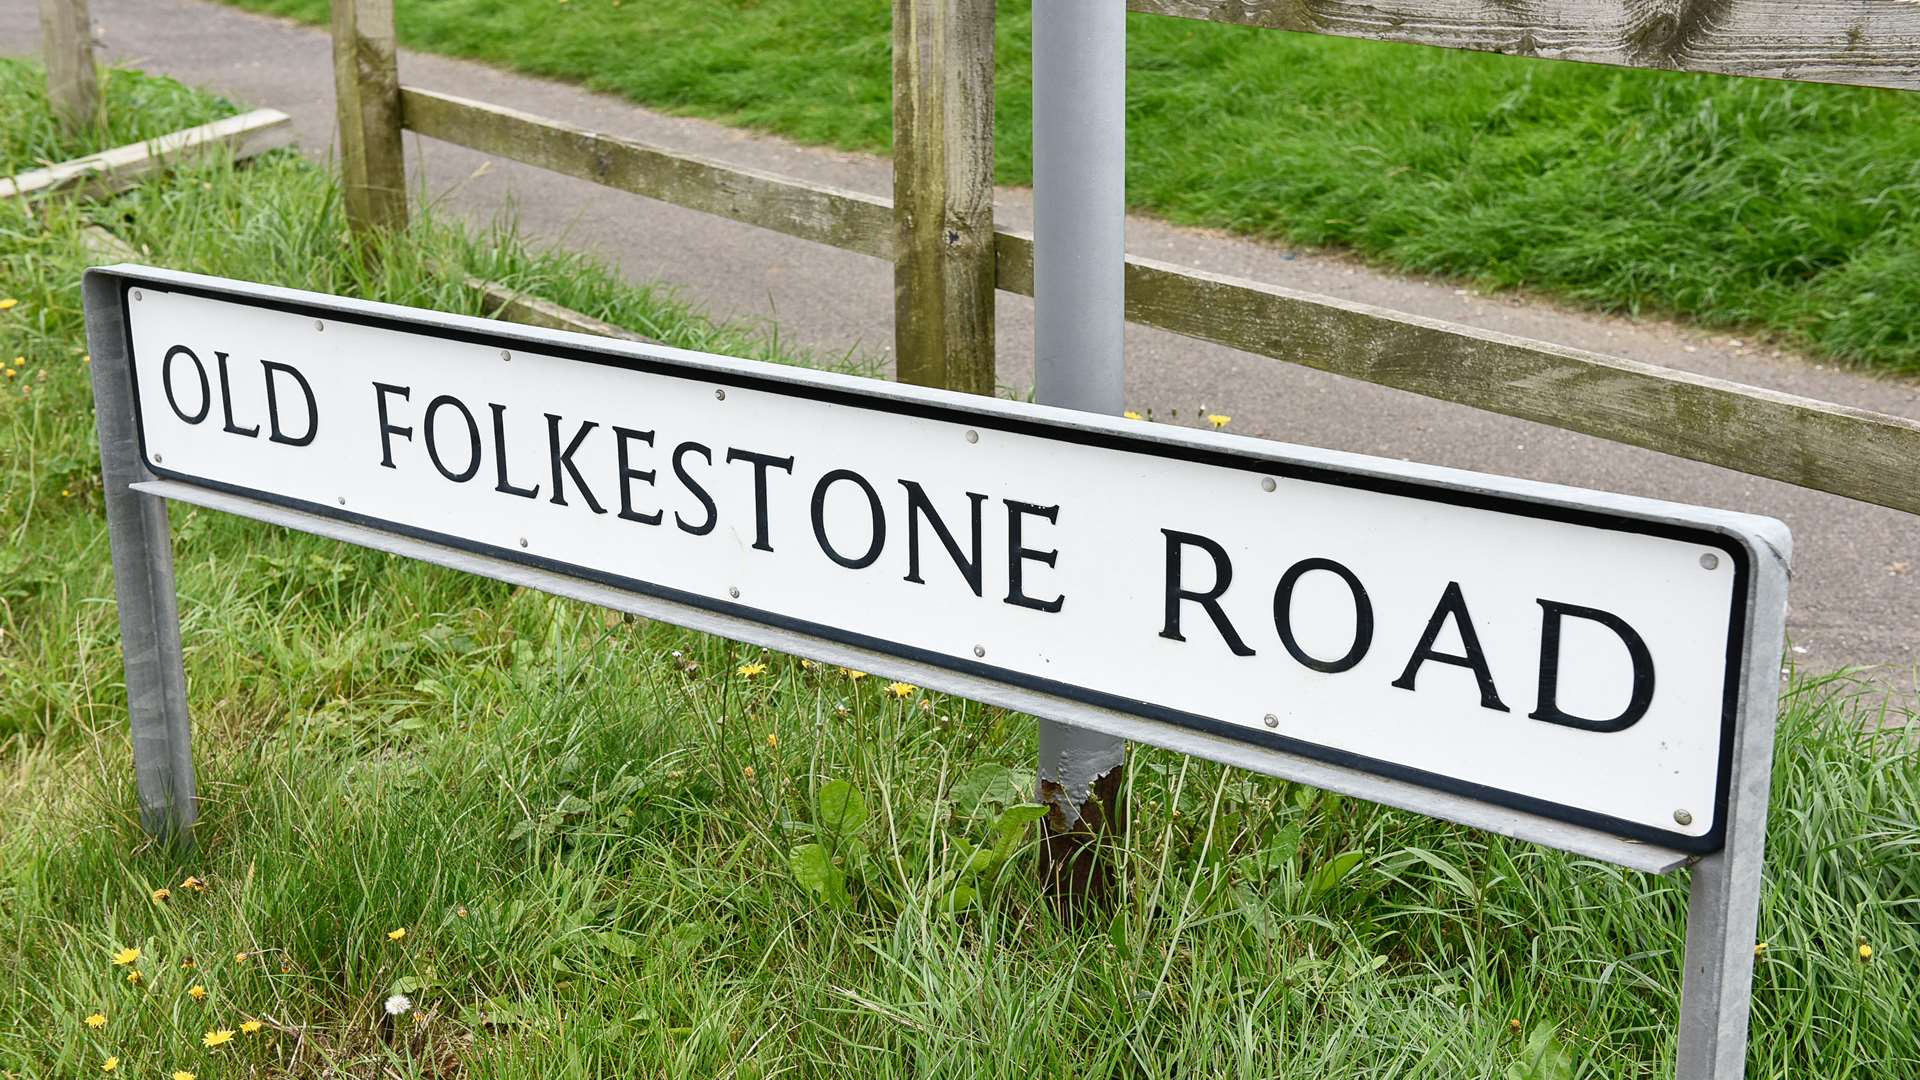 The murder took place in Old Folkestone Road, Aycliffe